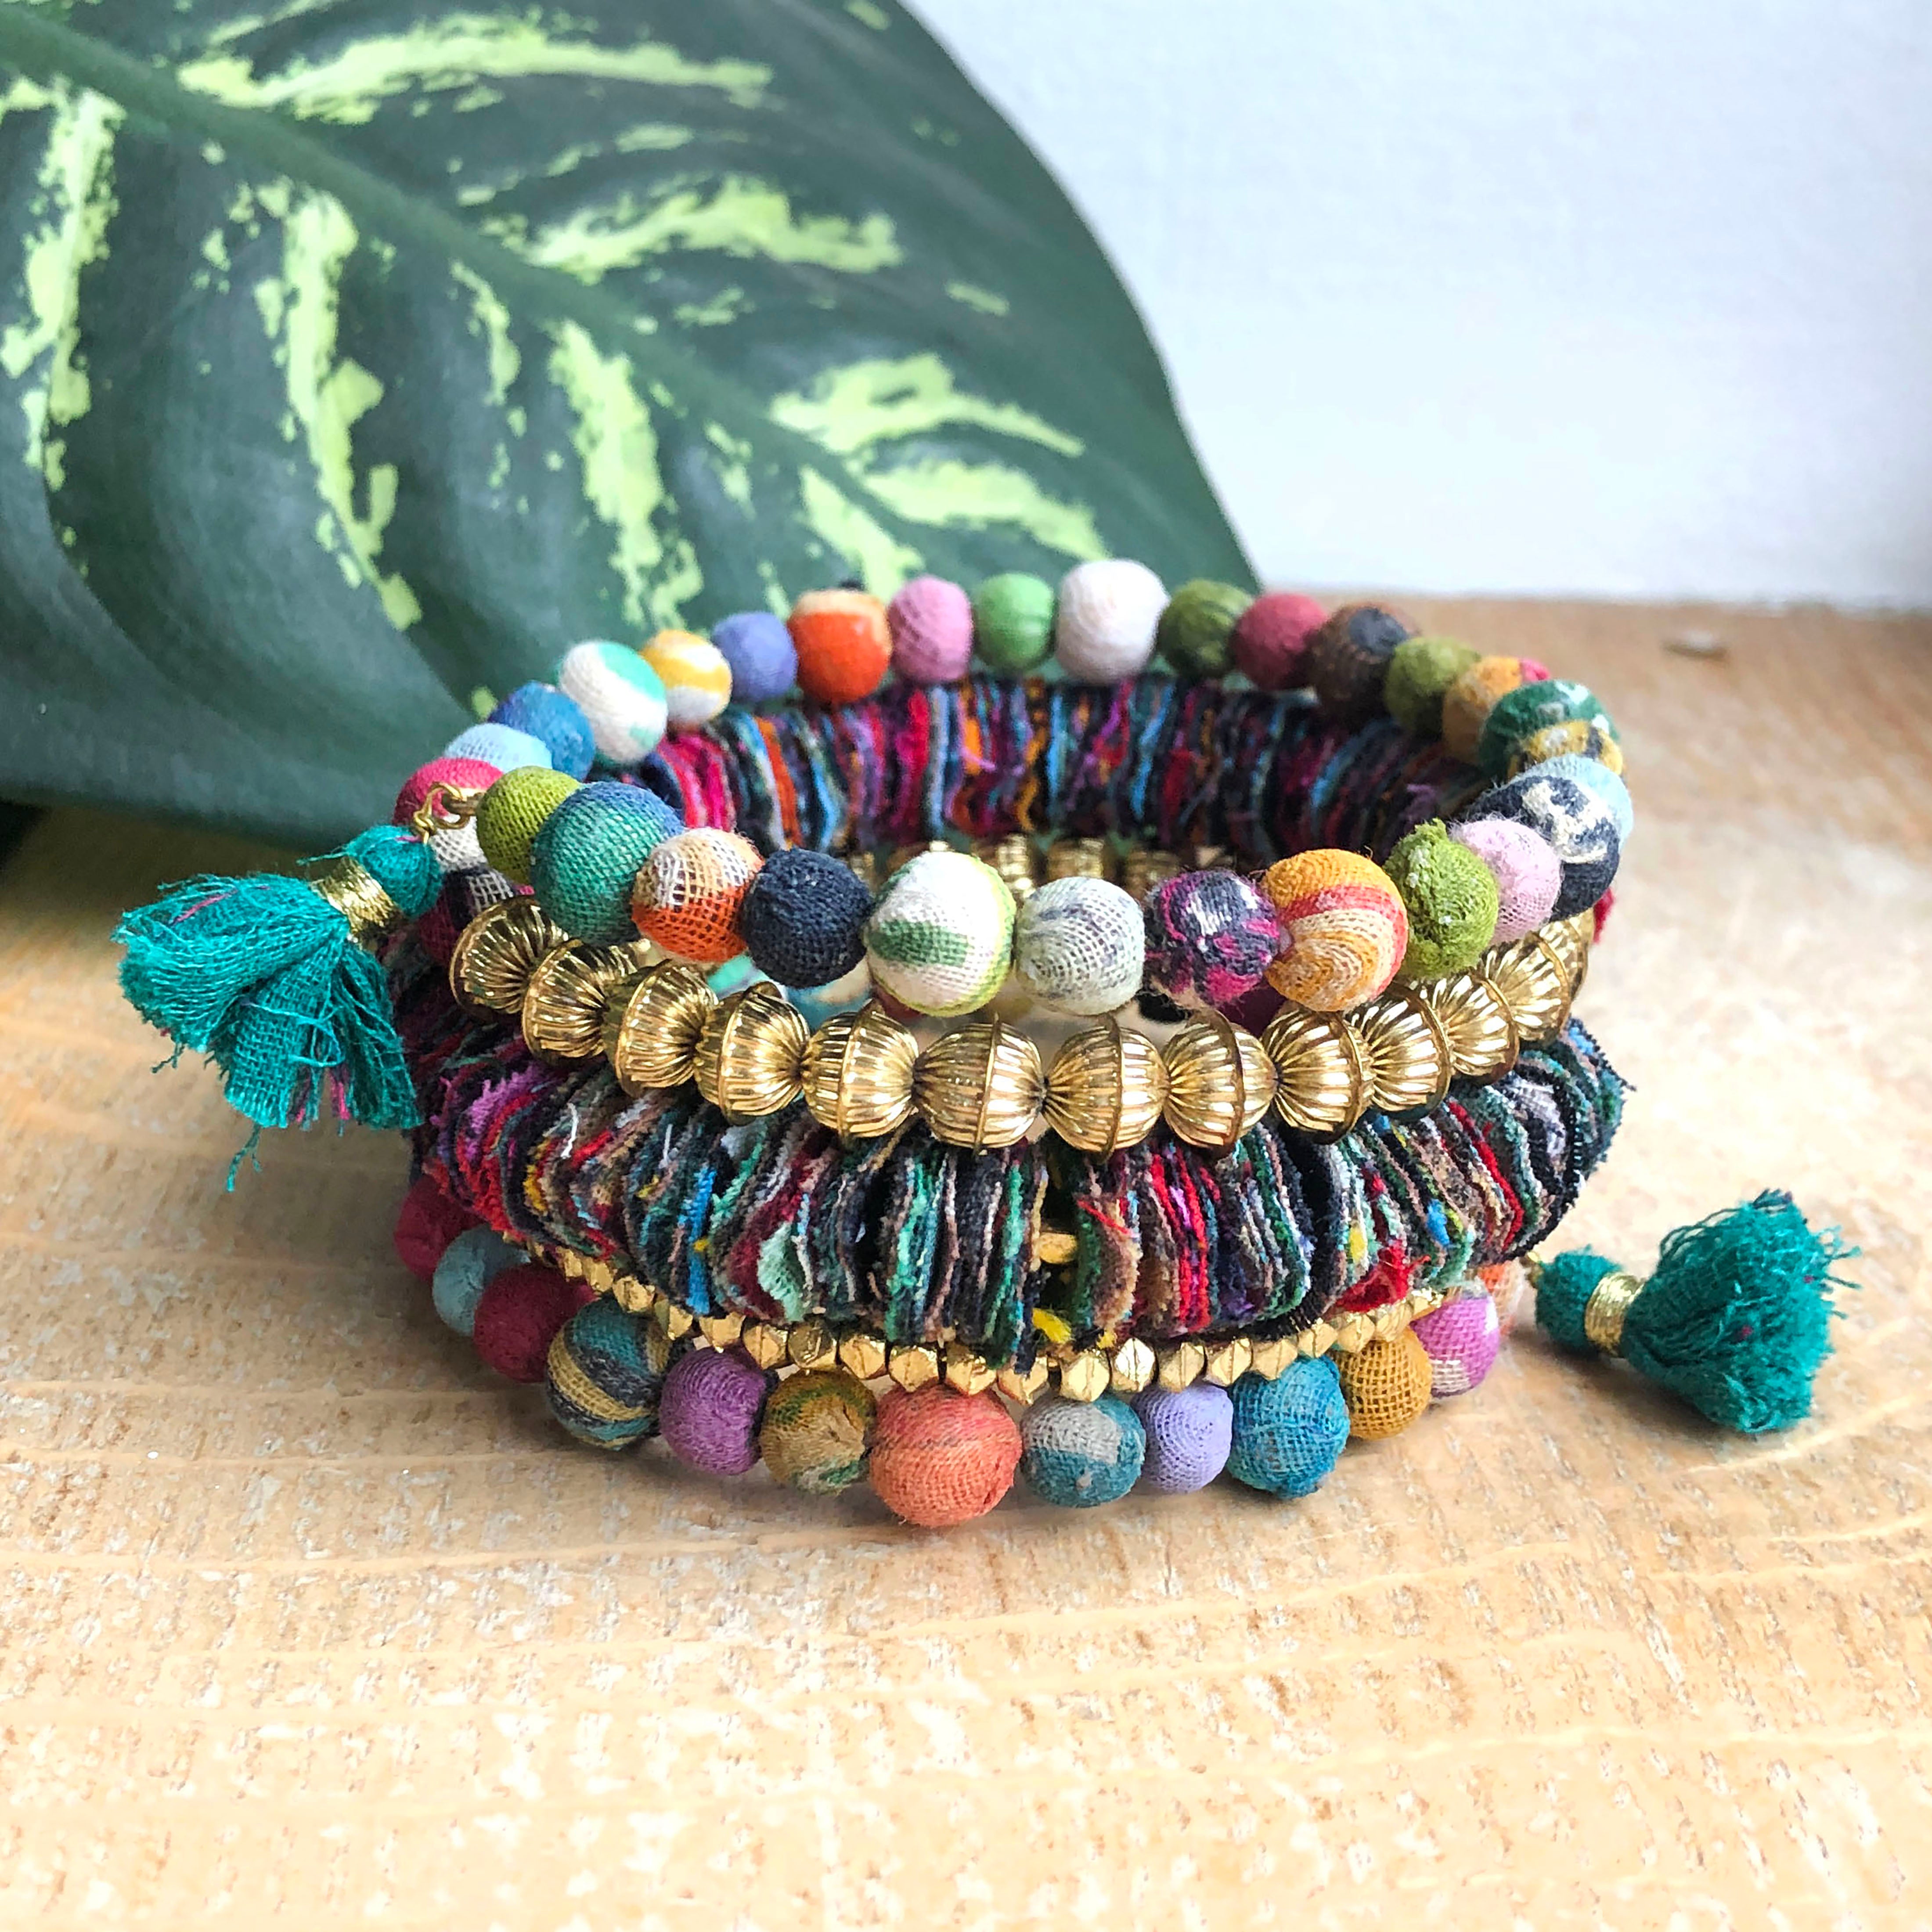 How to Make Sustainable Friendship Bracelets or Kandi With Eco Beads